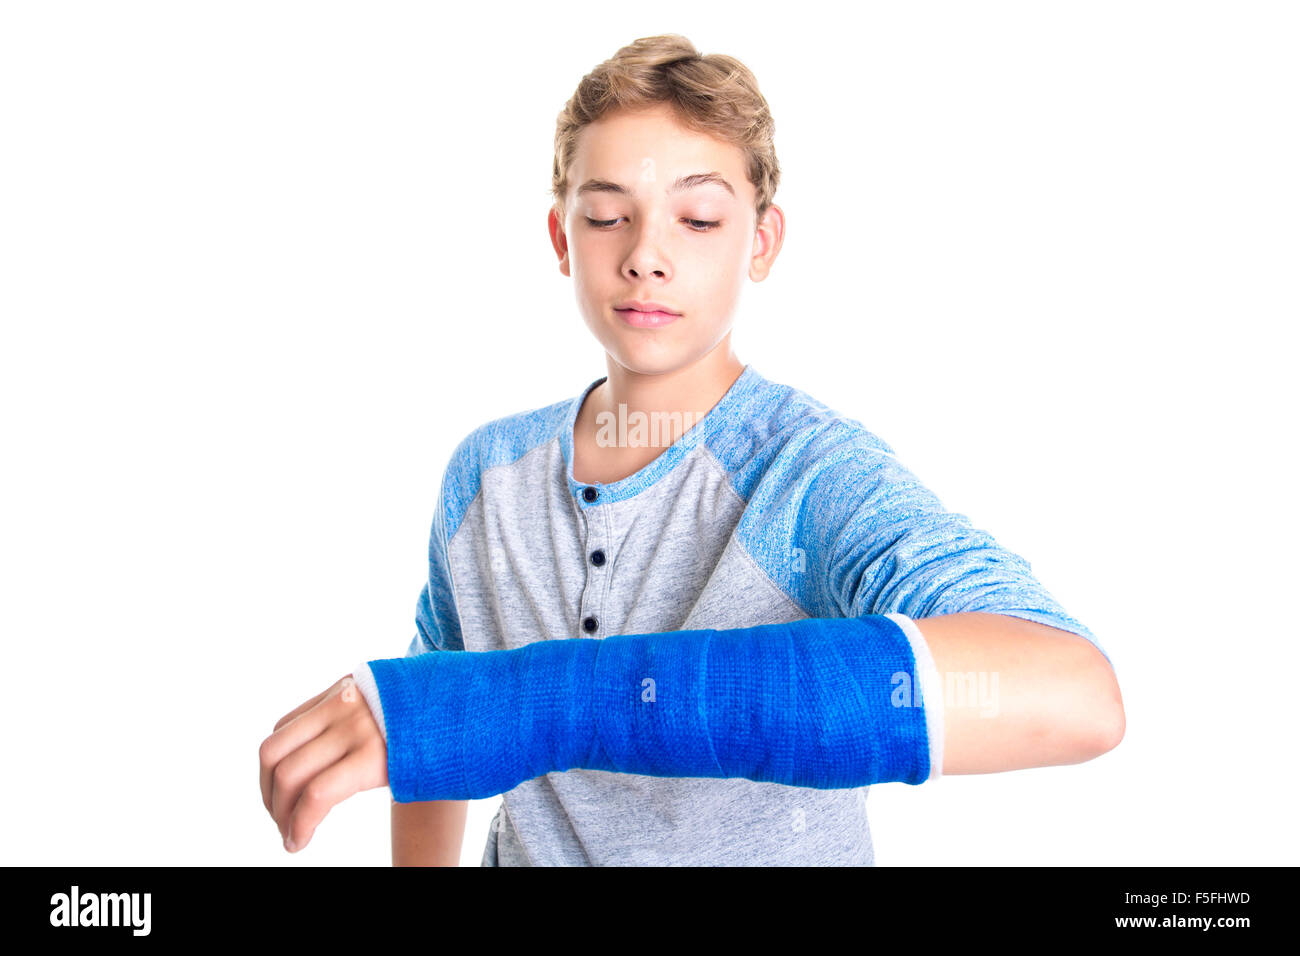 Hand in Cast on White Background Stock Image - Image of fiberglass, hurt:  167244825